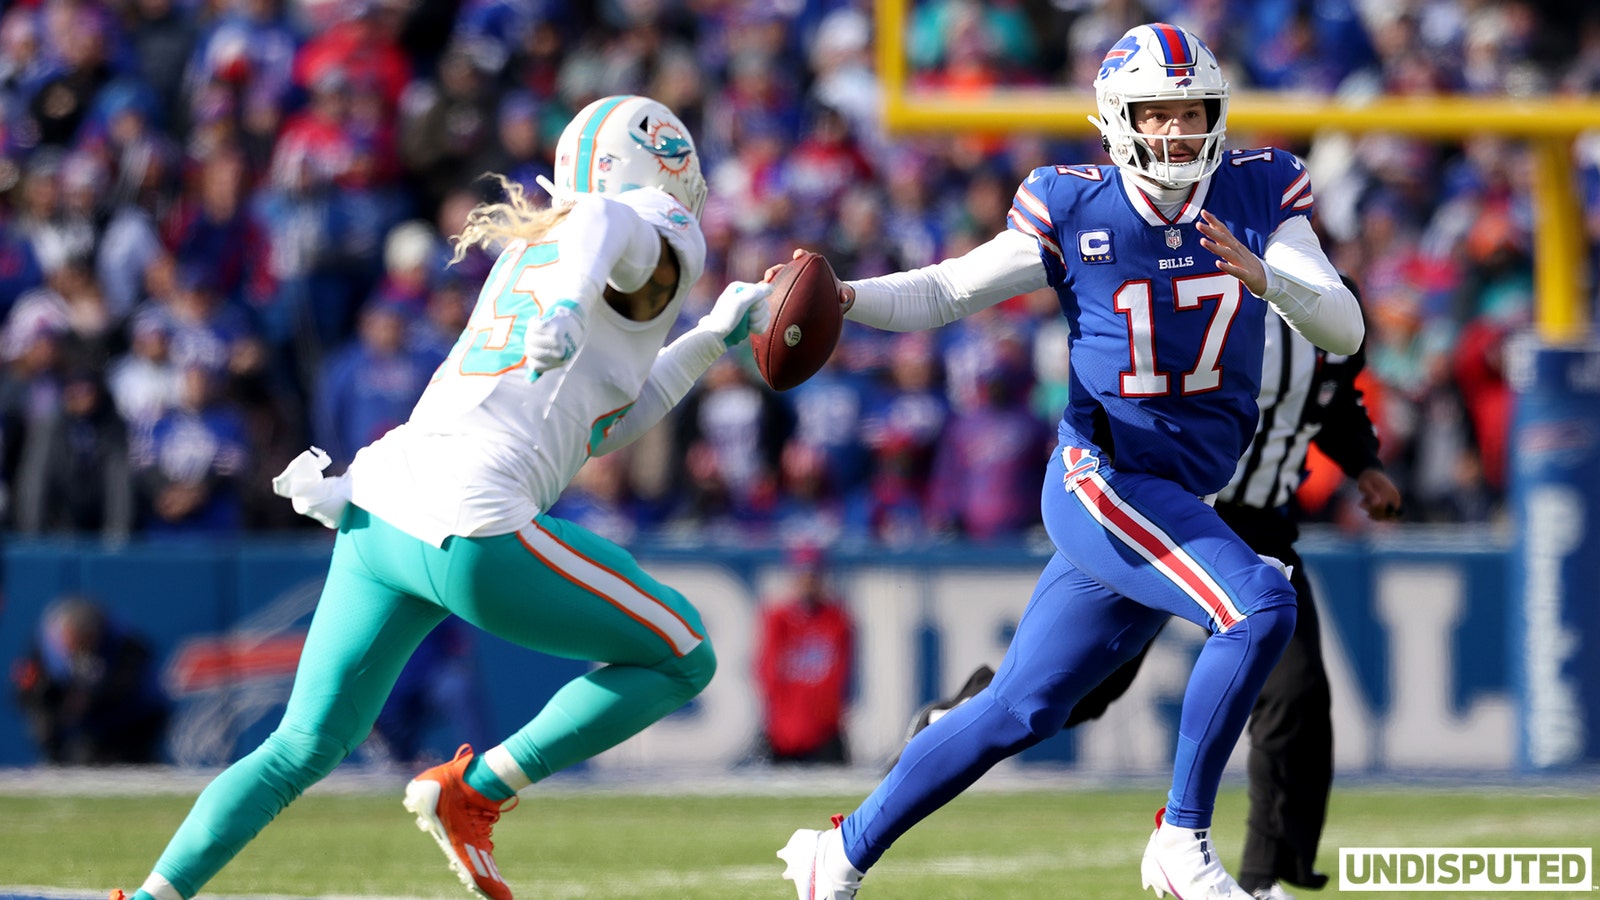 Dolphins host Bills in Week 18, winner clinches AFC East title